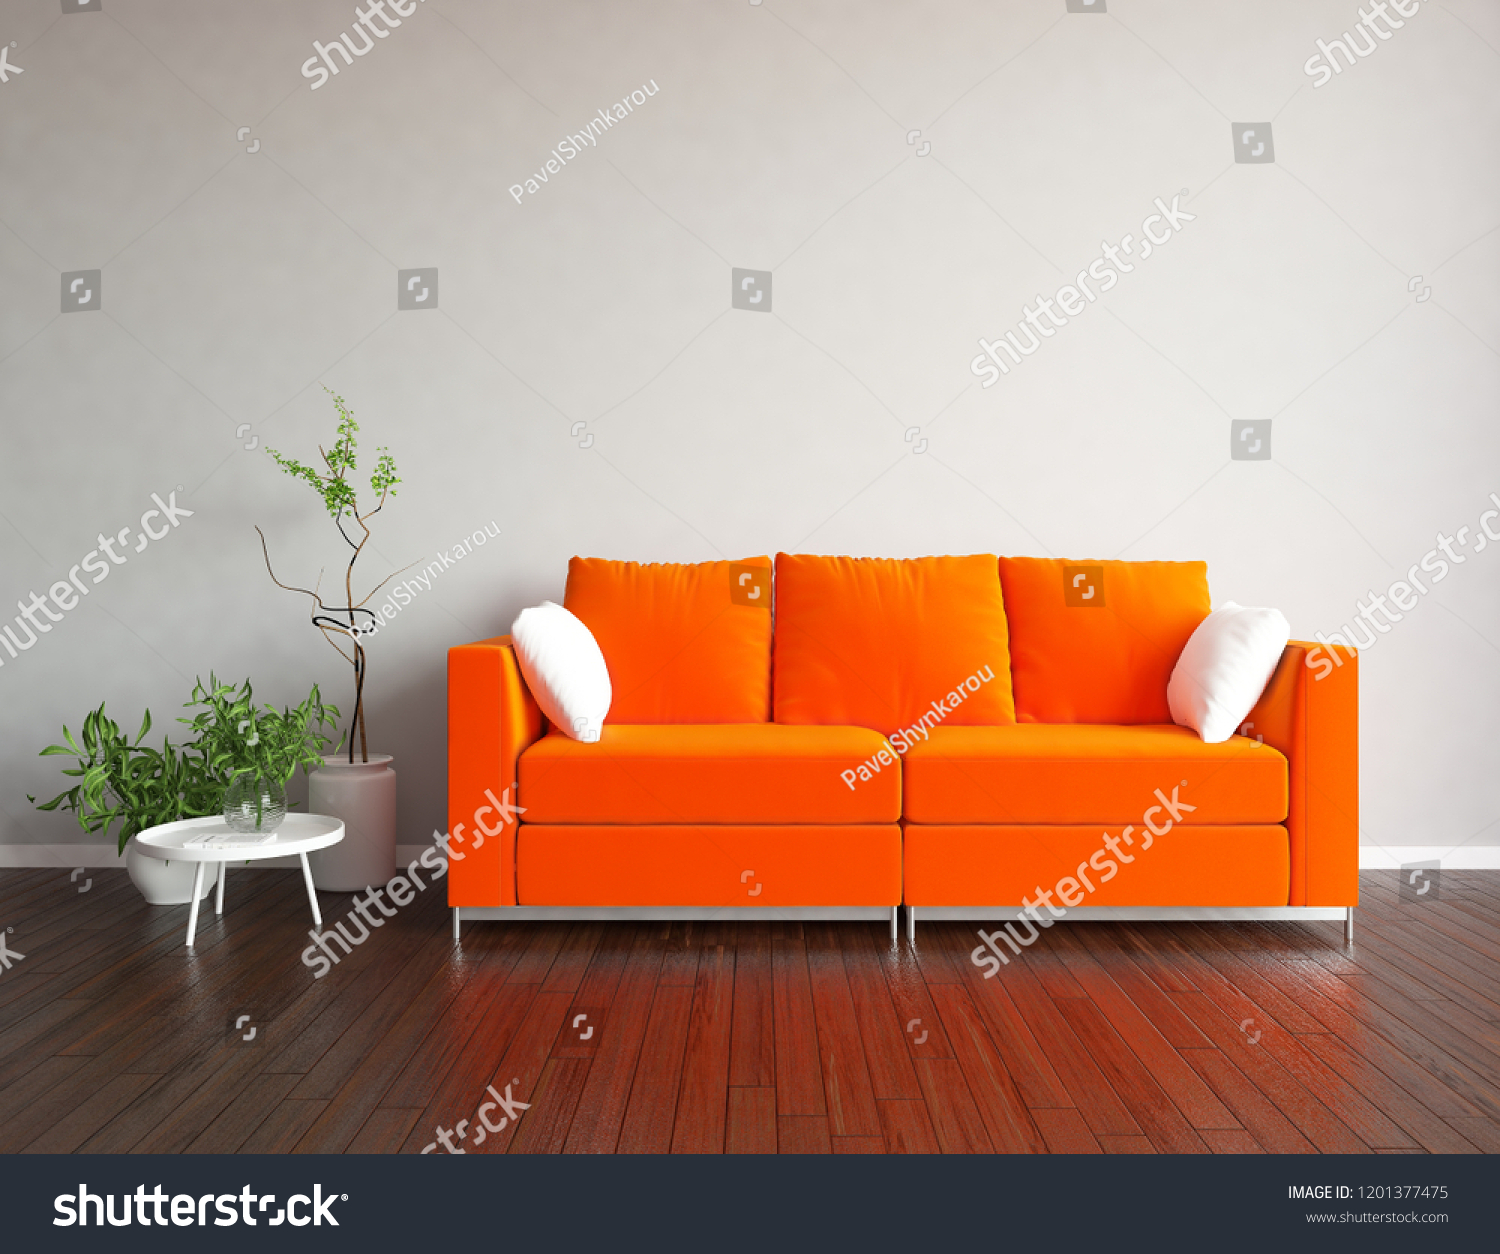 Idea of a white scandinavian living  room interior with  sofa, vases on the wooden floor and decor on the large wall and white landscape in window. Home nordic interior. 3d illustration #1201377475